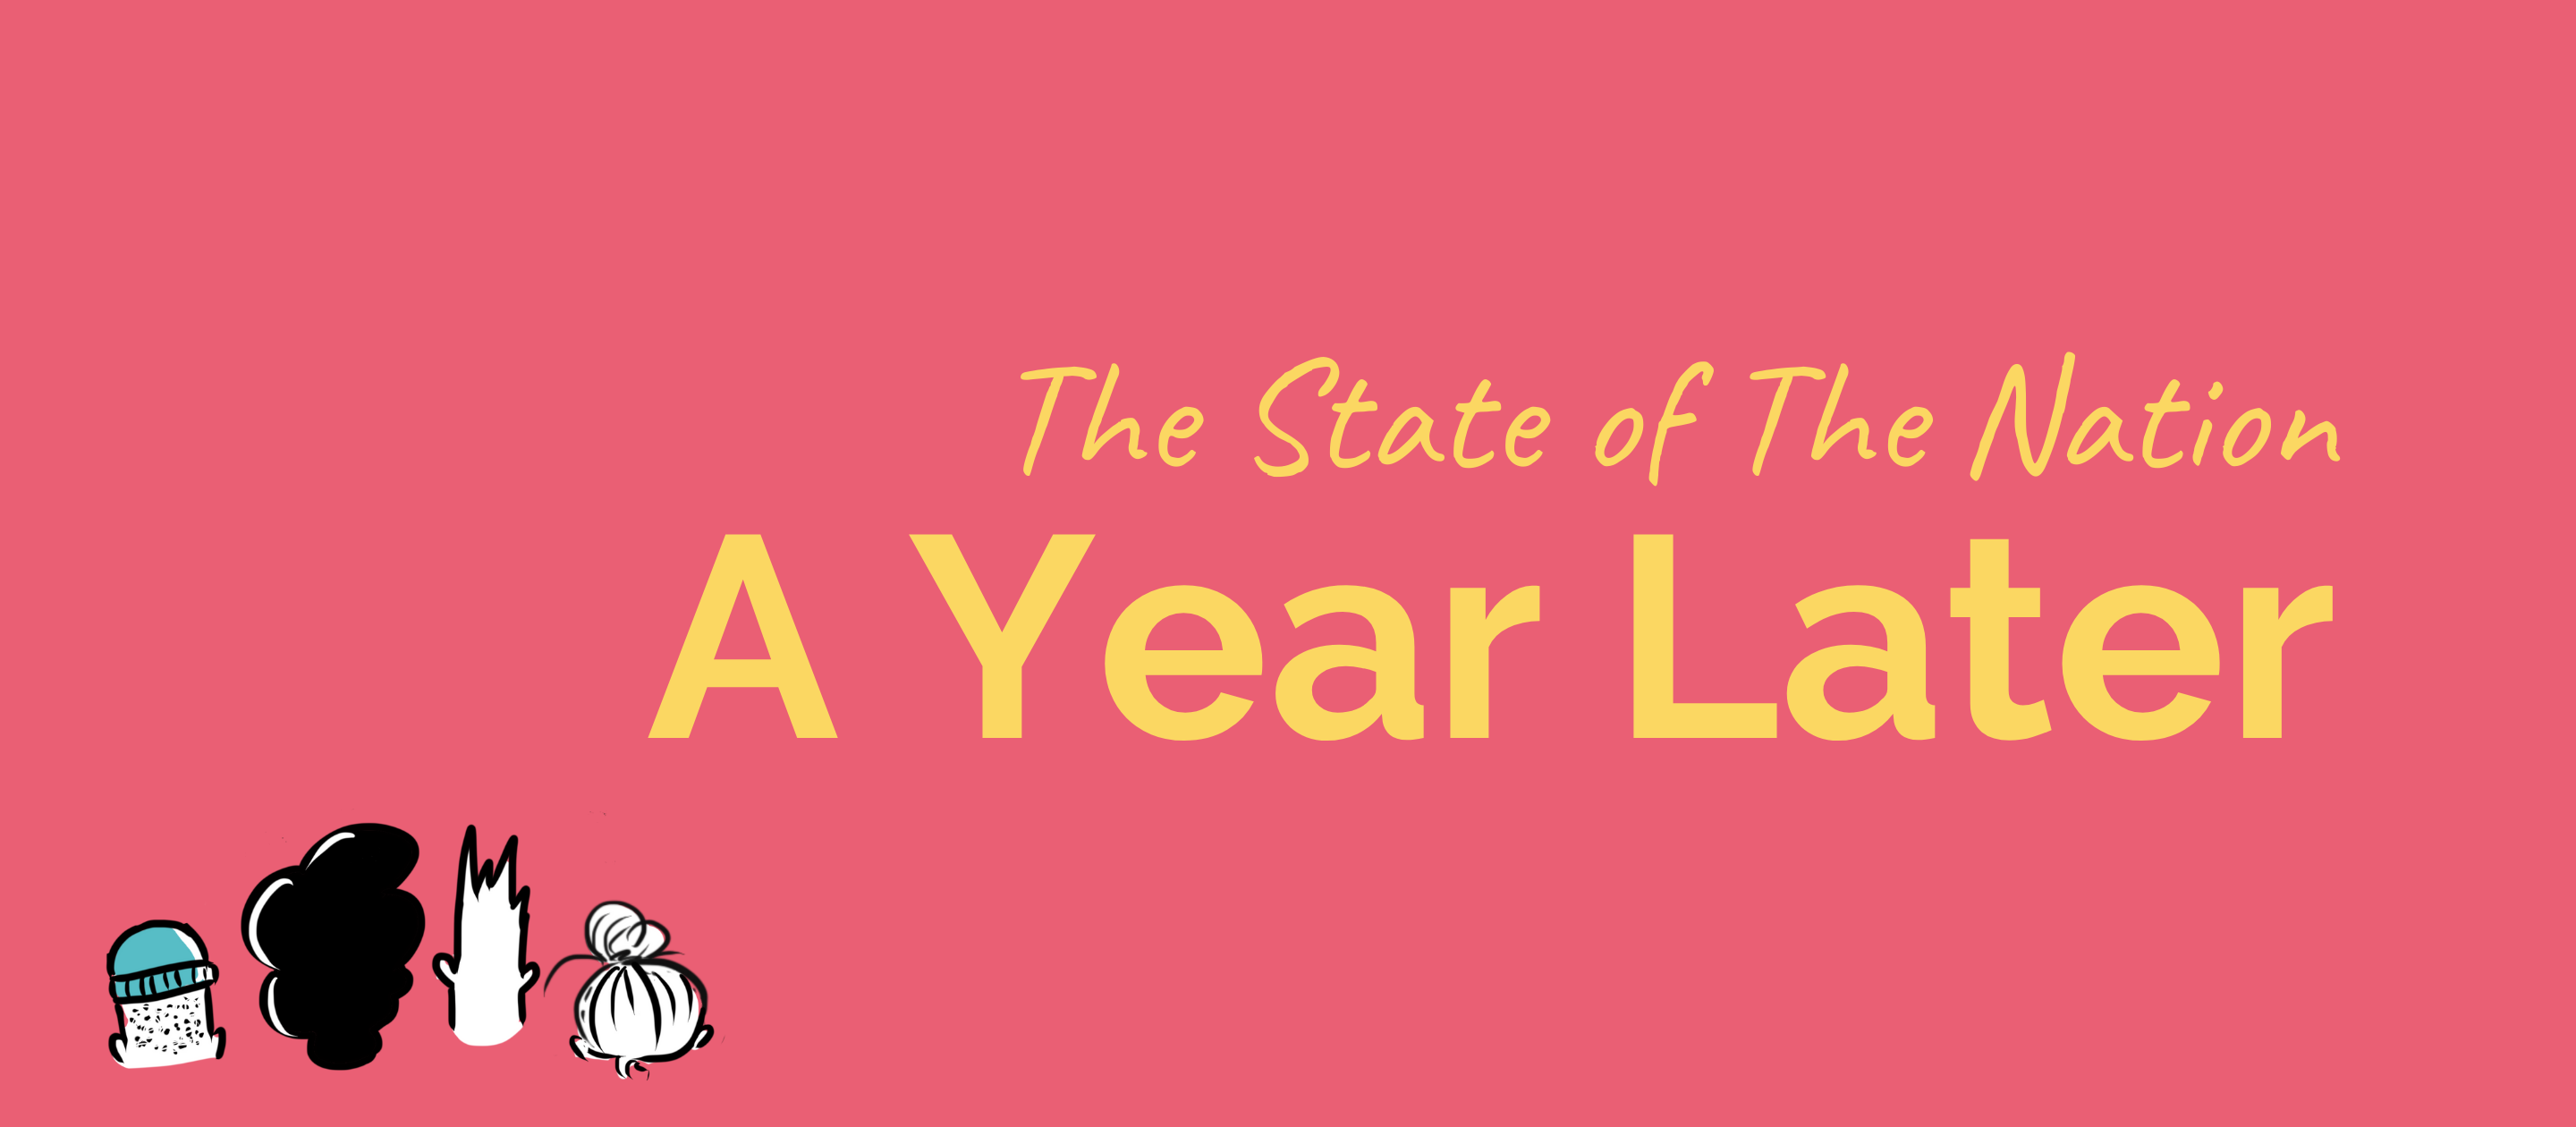 State of The Nation: 1 Year Later